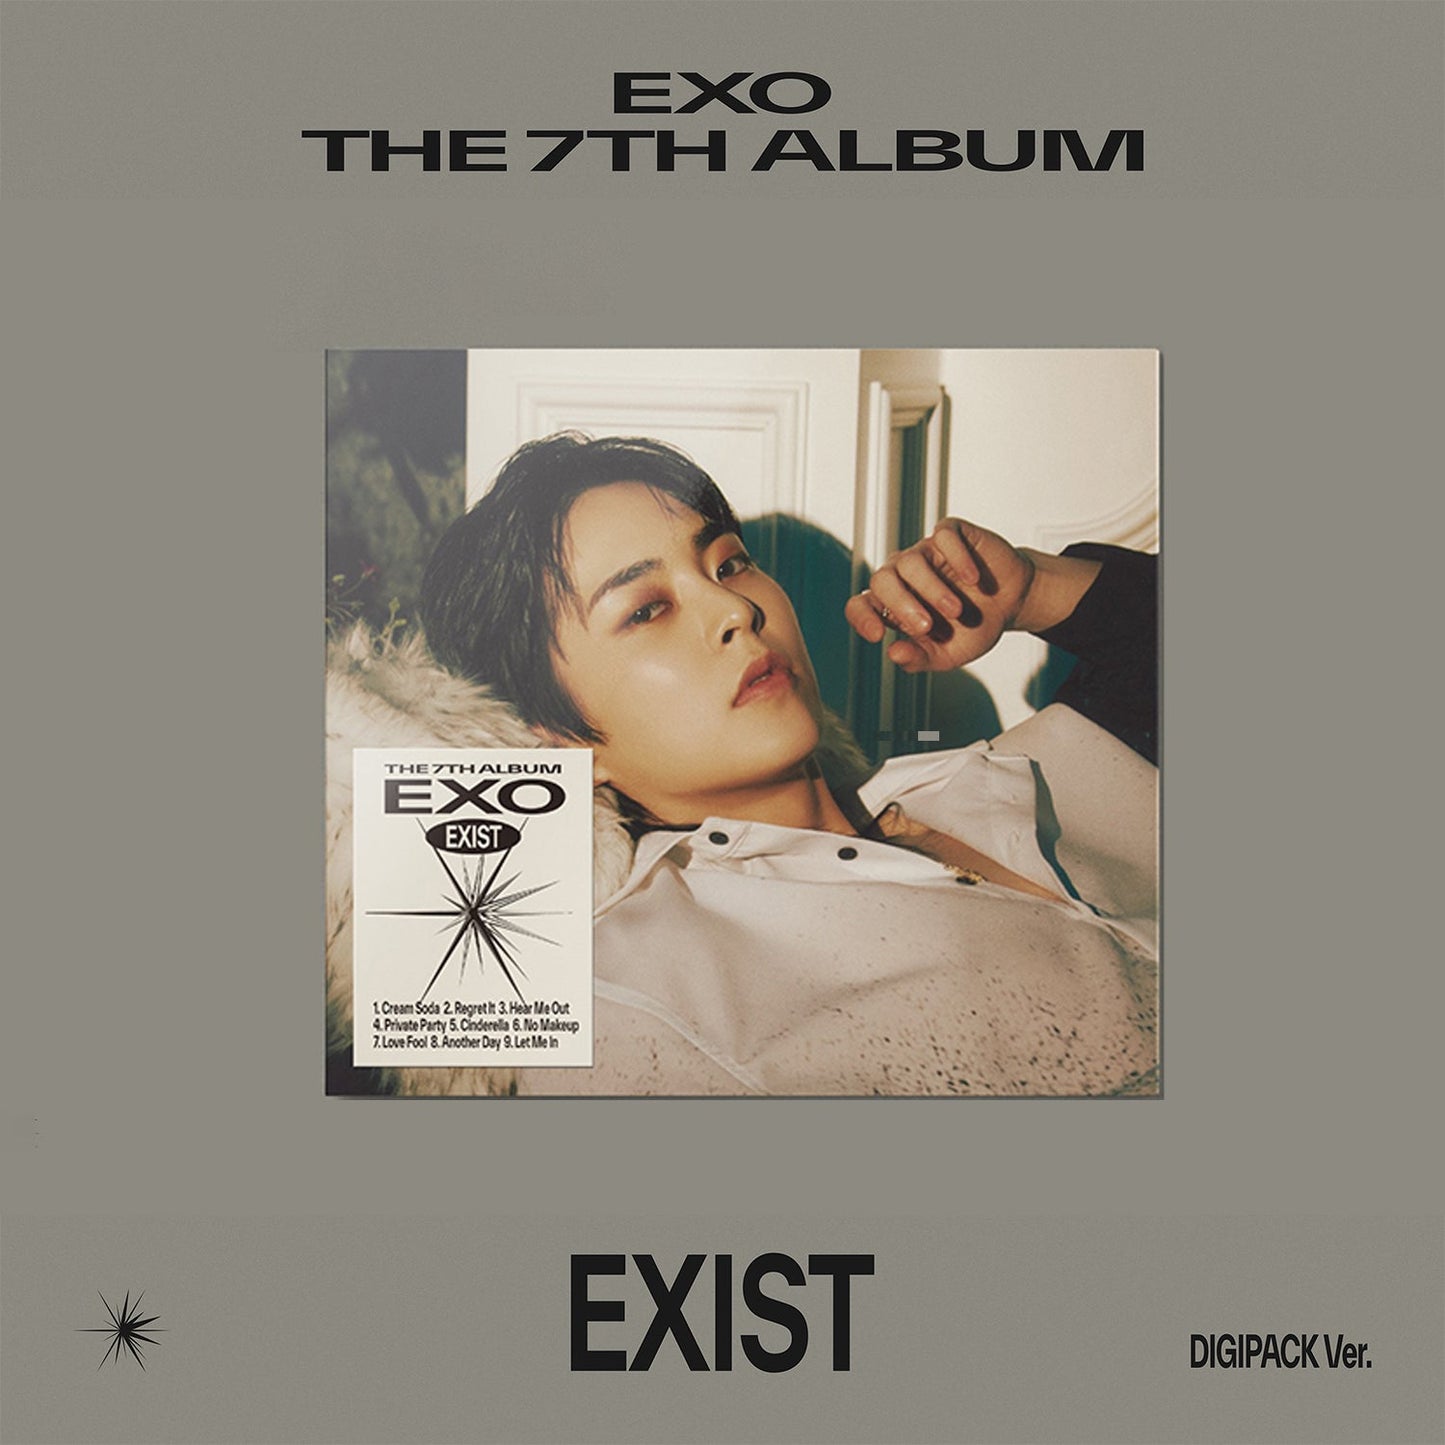 EXO 7TH ALBUM 'EXIST' (DIGIPACK) SUHO VERSION COVER